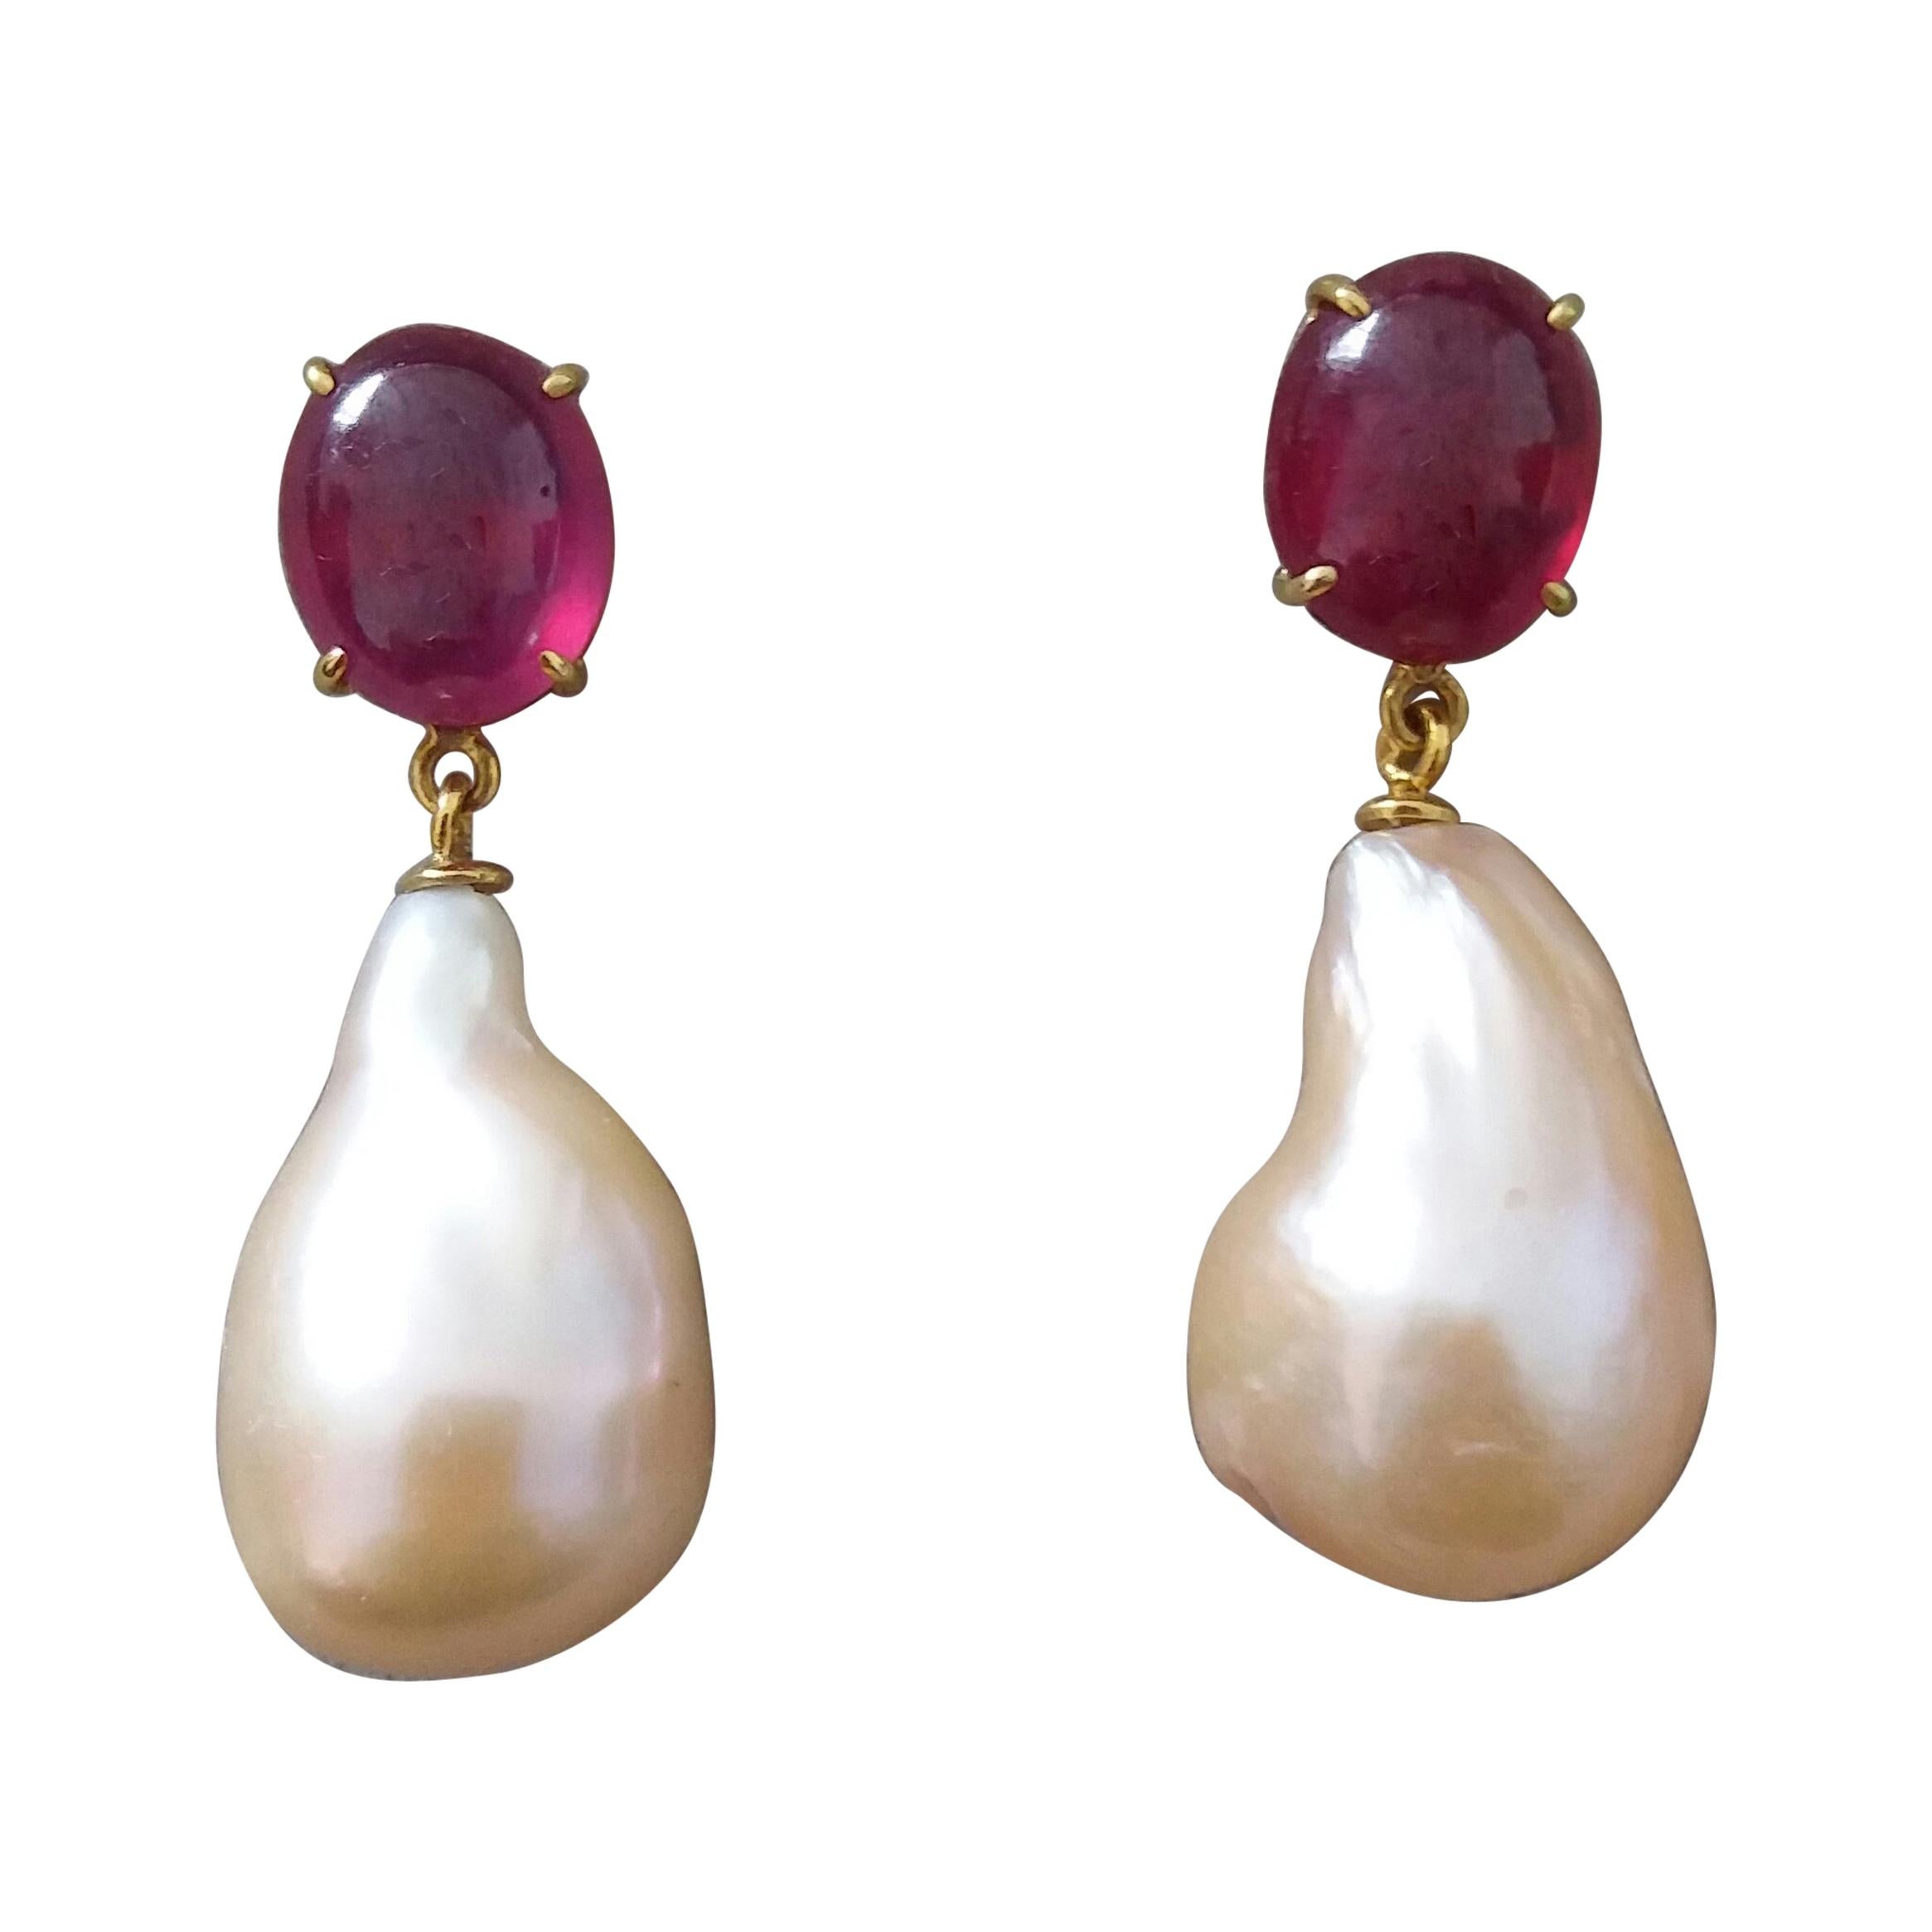 Big Size Pear Shape Cream Color Pearls Oval Ruby Cabochon 14 Karat Gold Earrings For Sale